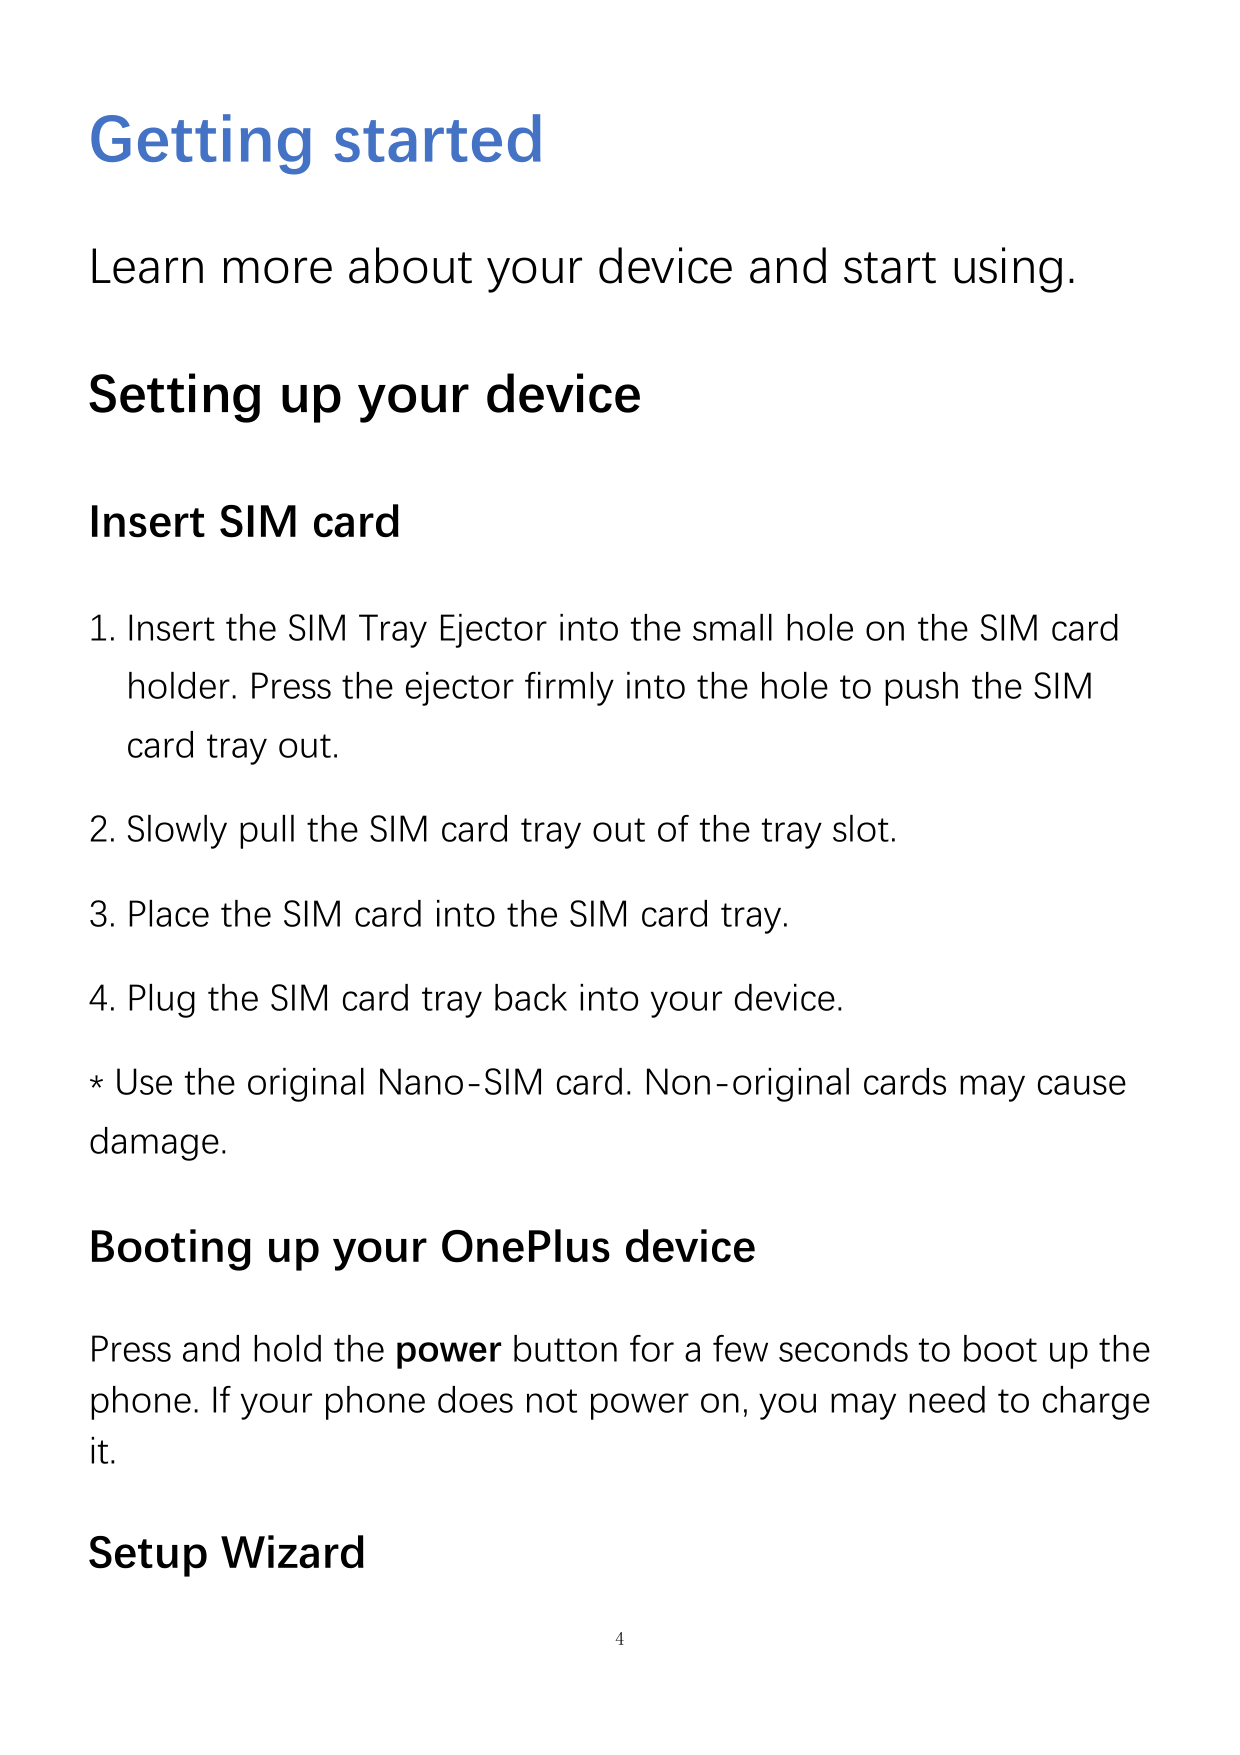 Getting startedLearn more about your device and start using.Setting up your deviceInsert SIM card1. Insert the SIM Tray Ejector 